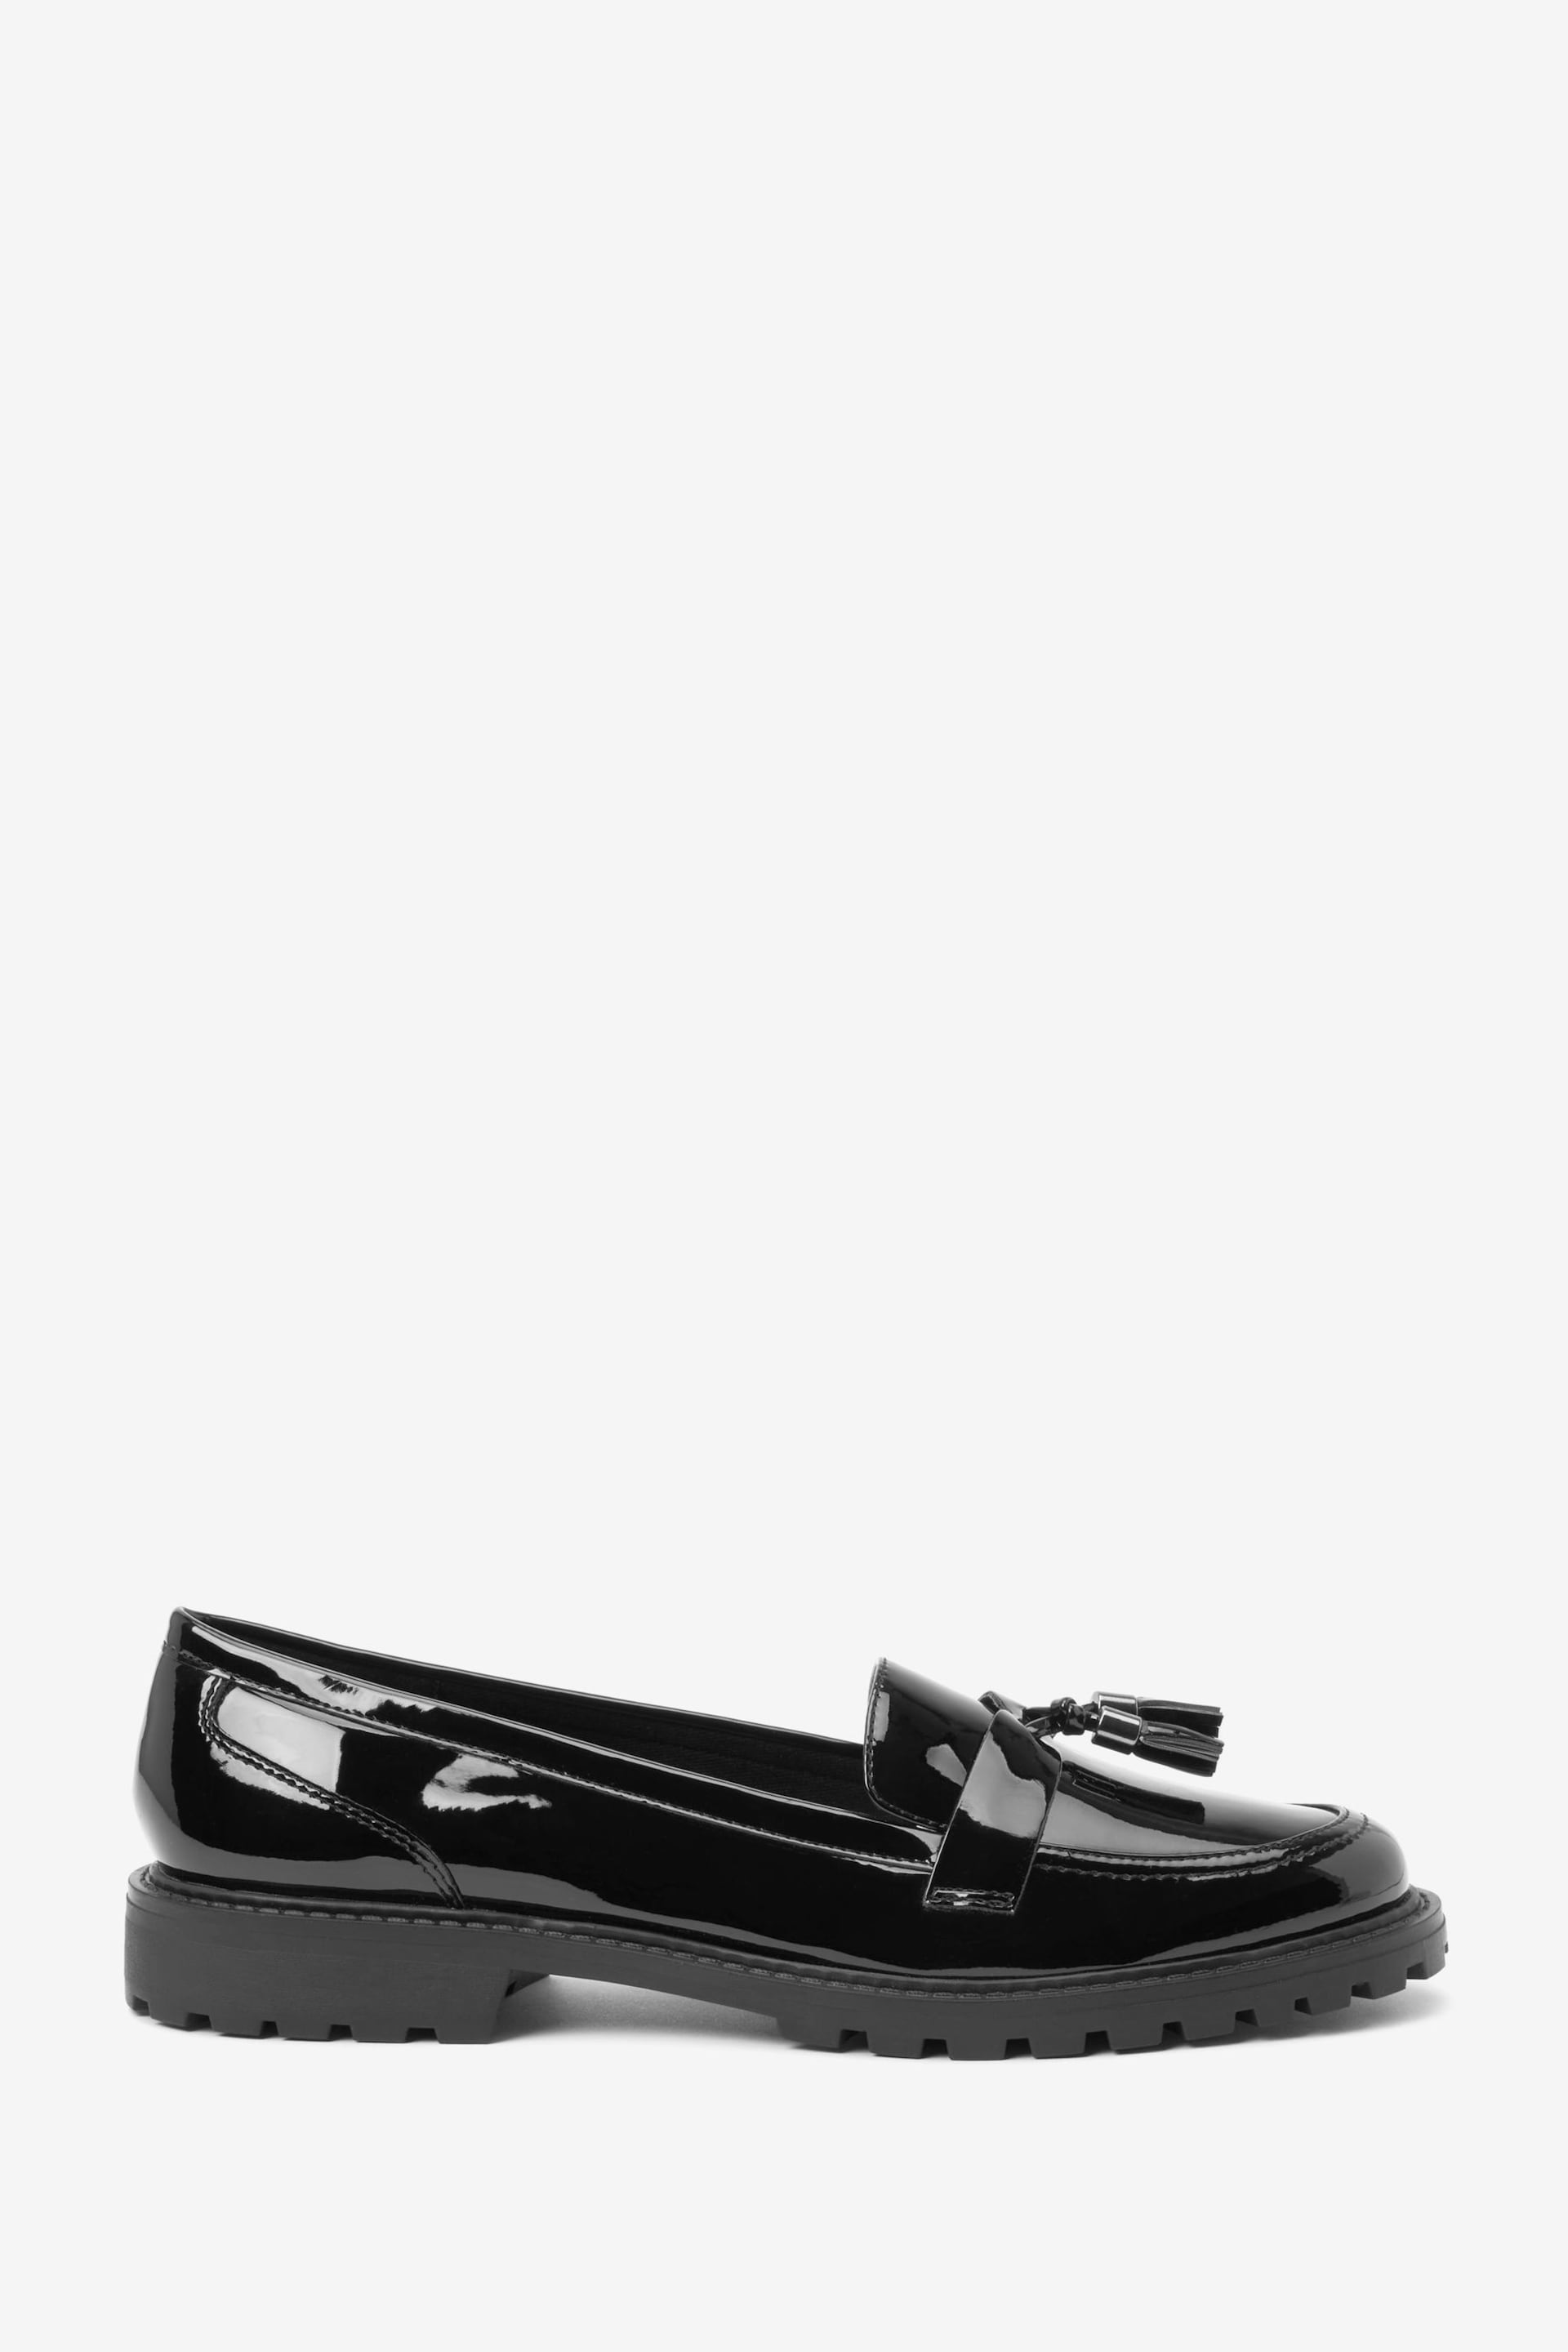 Black Patent Extra Wide Fit Forever Comfort® Tassel Detail Cleated Chunky Loafer Shoes - Image 3 of 6